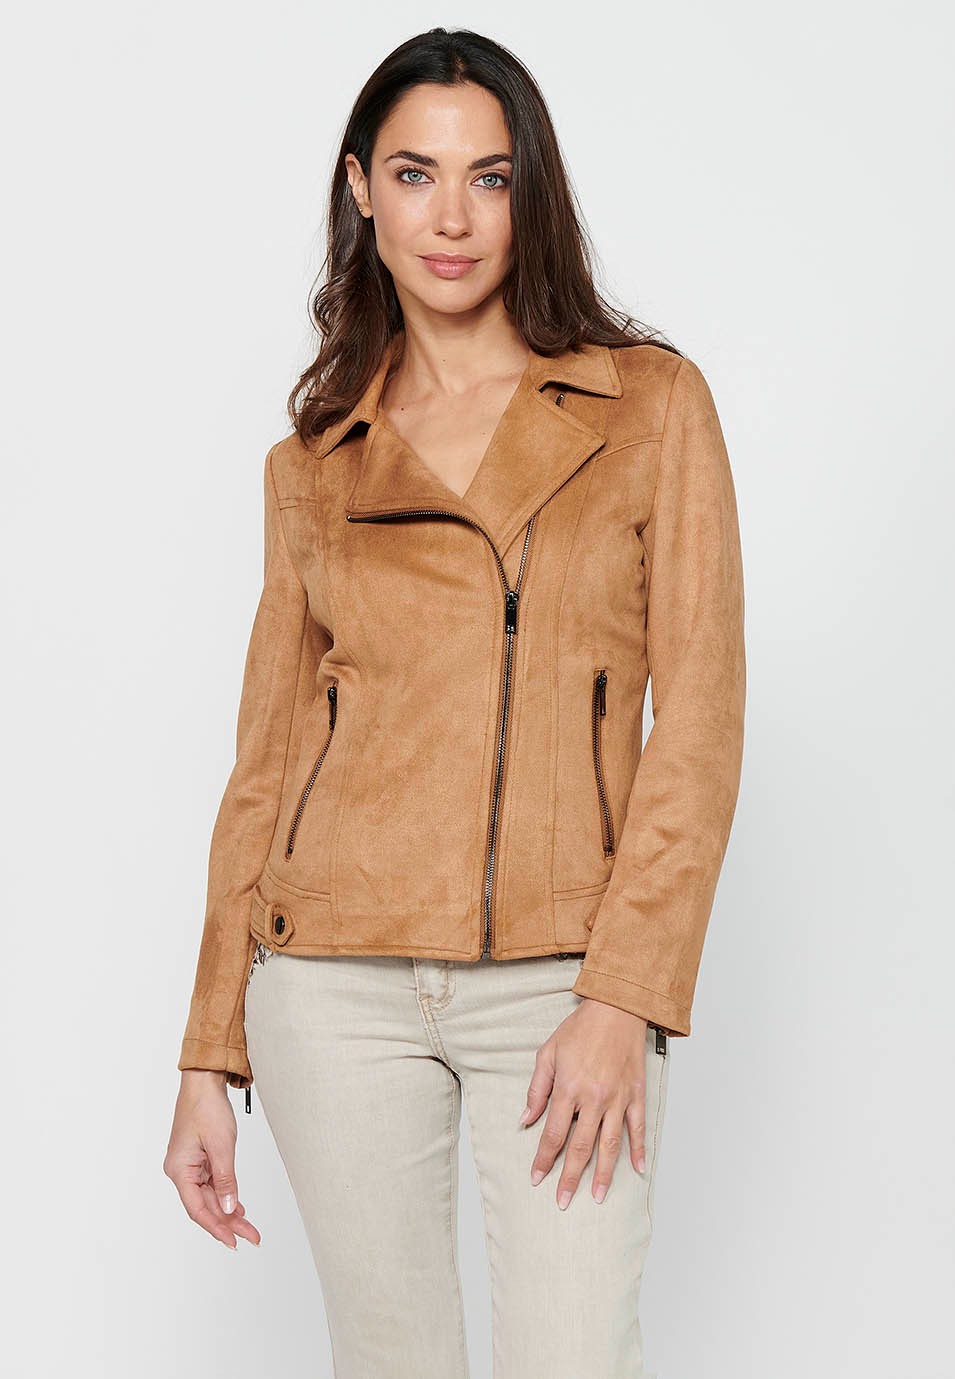 Camel Color Long Sleeve Jacket with Cross-Zip Closure with Lapel Collar and Pockets for Women